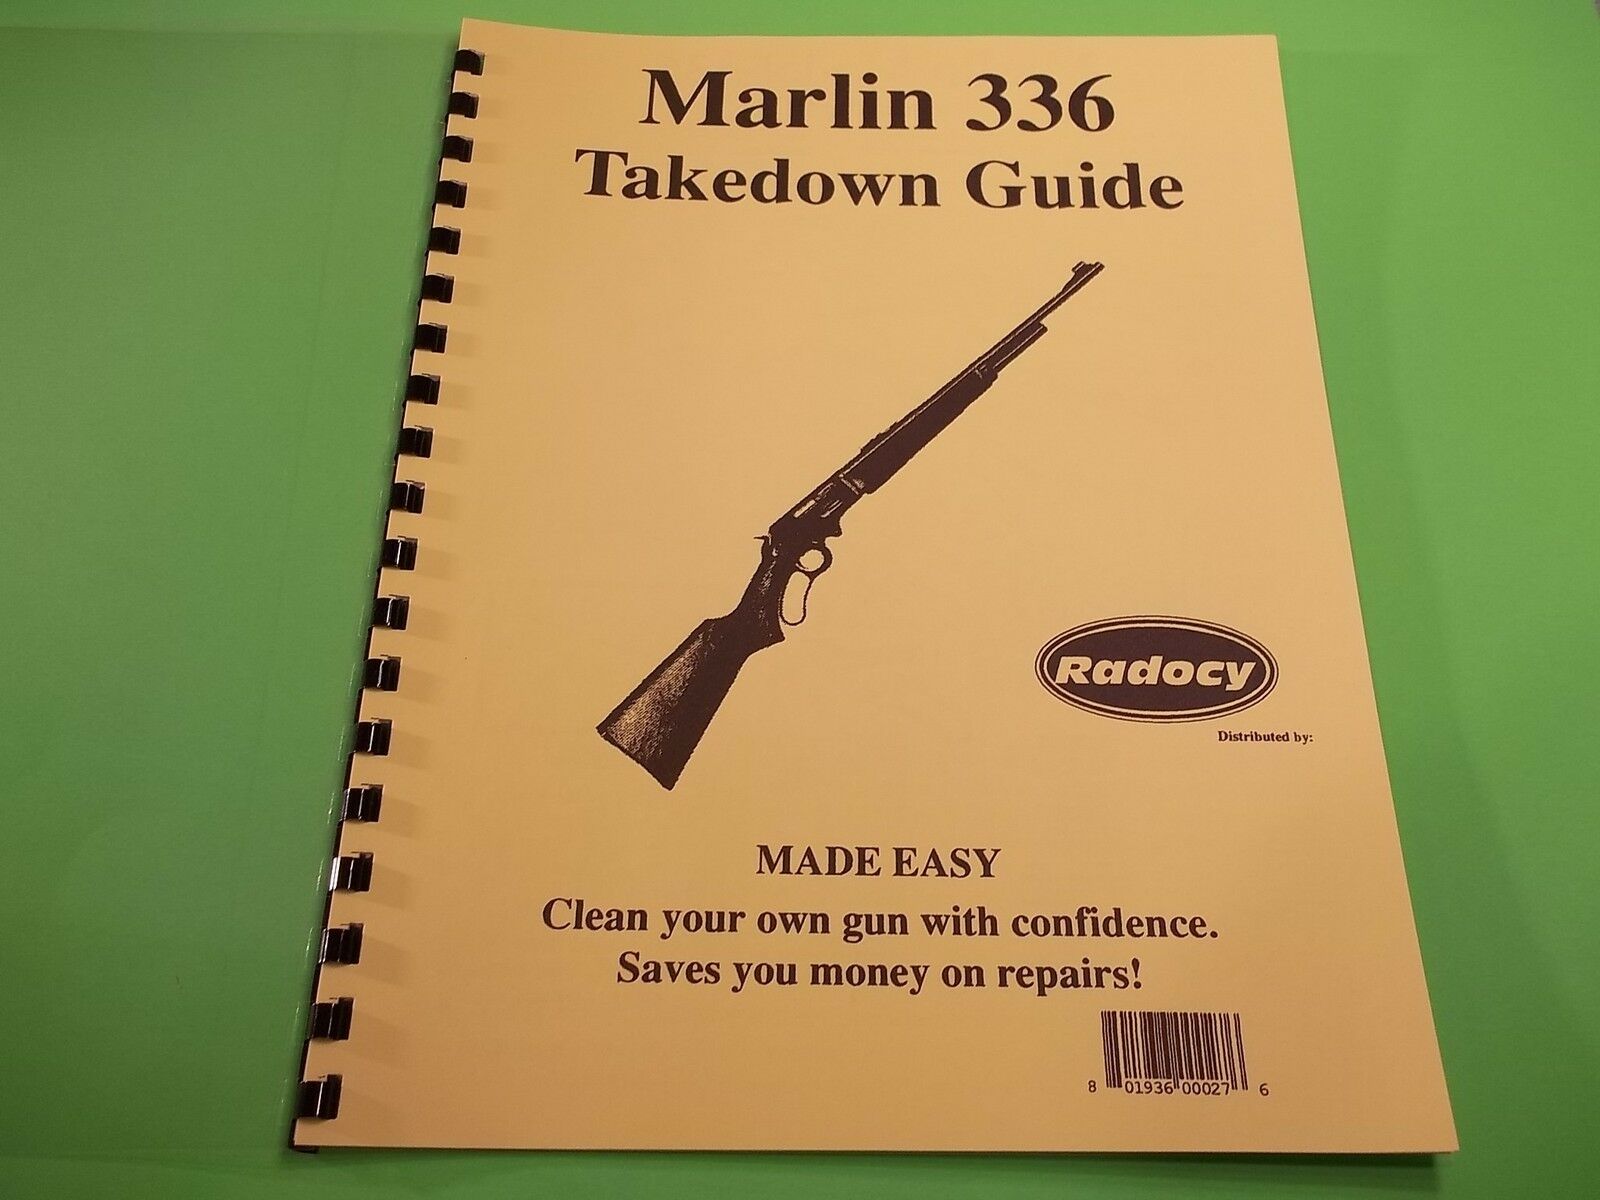 Takedown Manual Guide Marlin 336 Lever Action Rifle, Similar Models Included